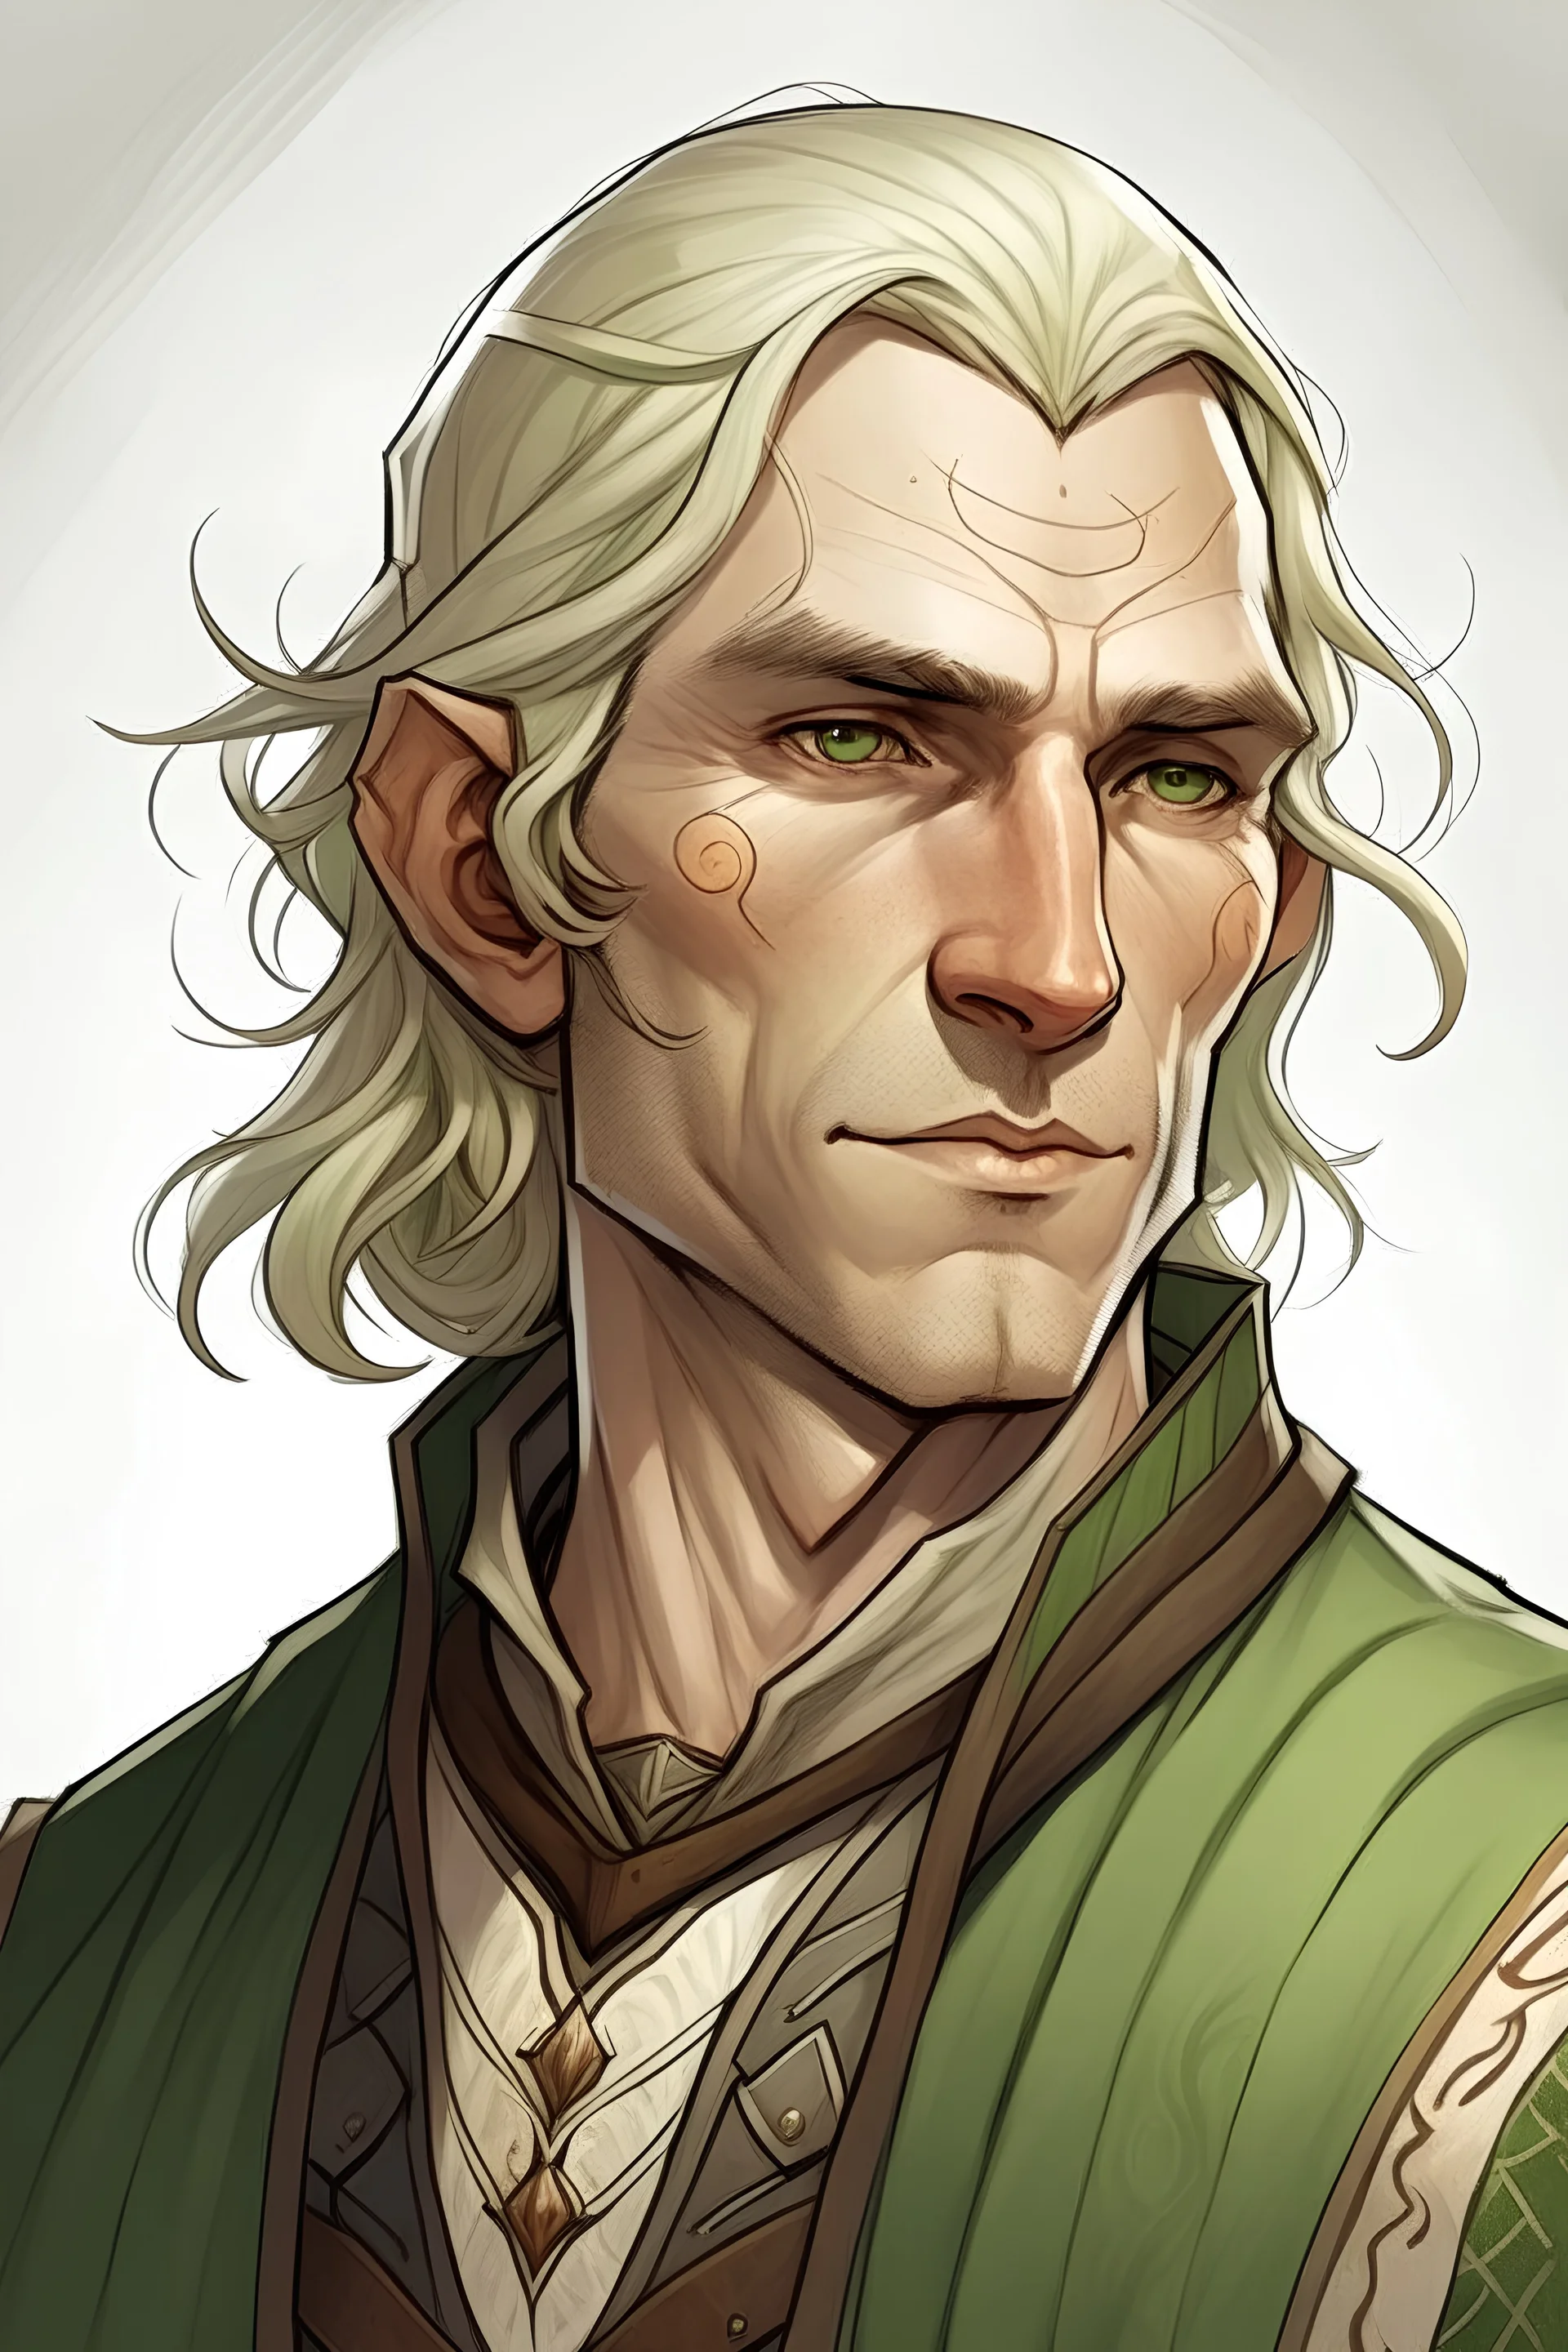 middle aged male elf, commoner, serious expression on face, straight blond hair shoulder length, battle scar on cheek, green eyes, thin lips, drawing style, linen clothes